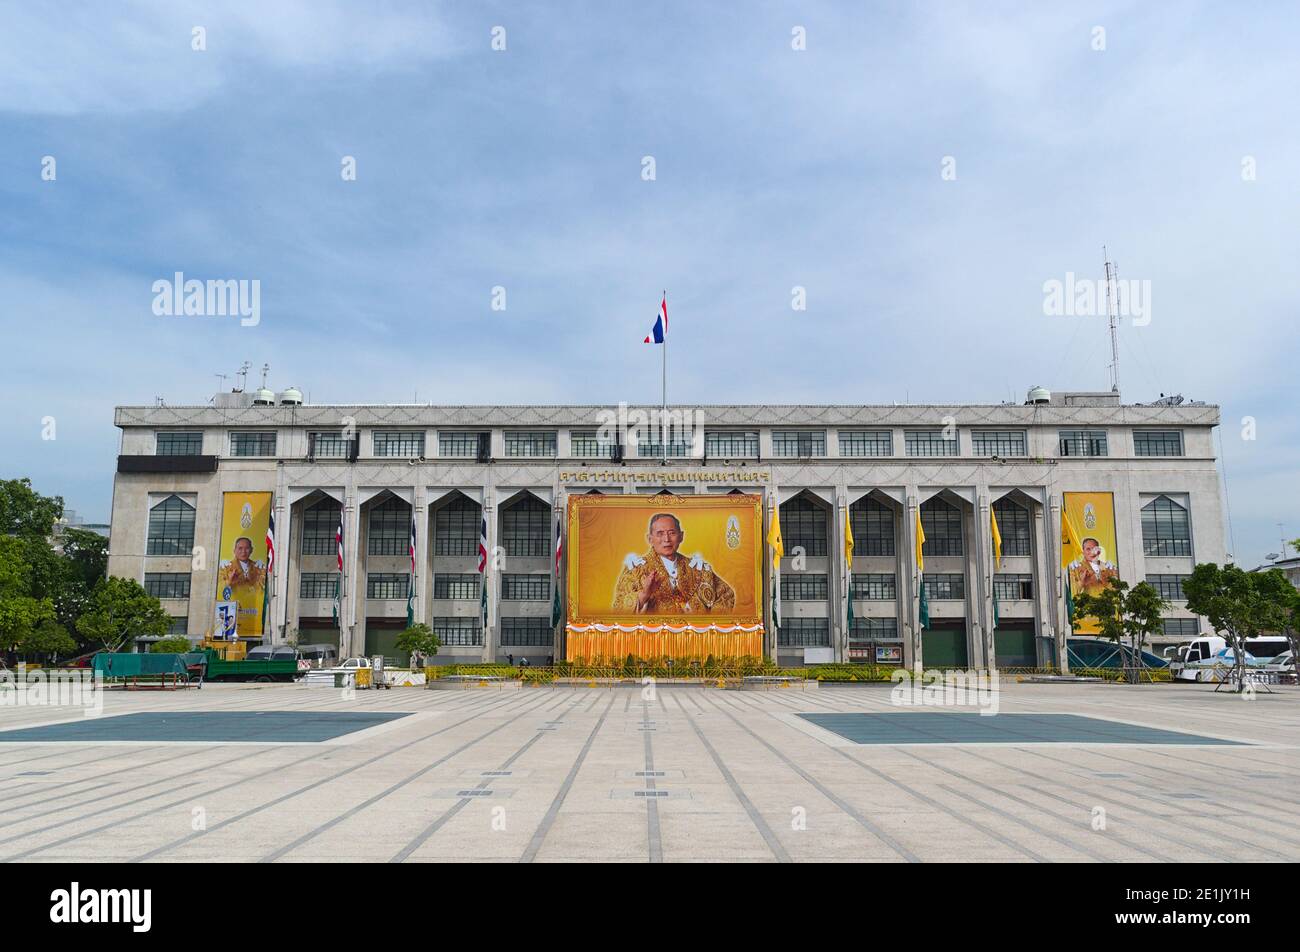 Bangkok, Thailand, December, 2015: Larn Kon Mueng square and view to building with large portrait of Thai King Bhumibol Adulyadej the Great (Rama IX) Stock Photo